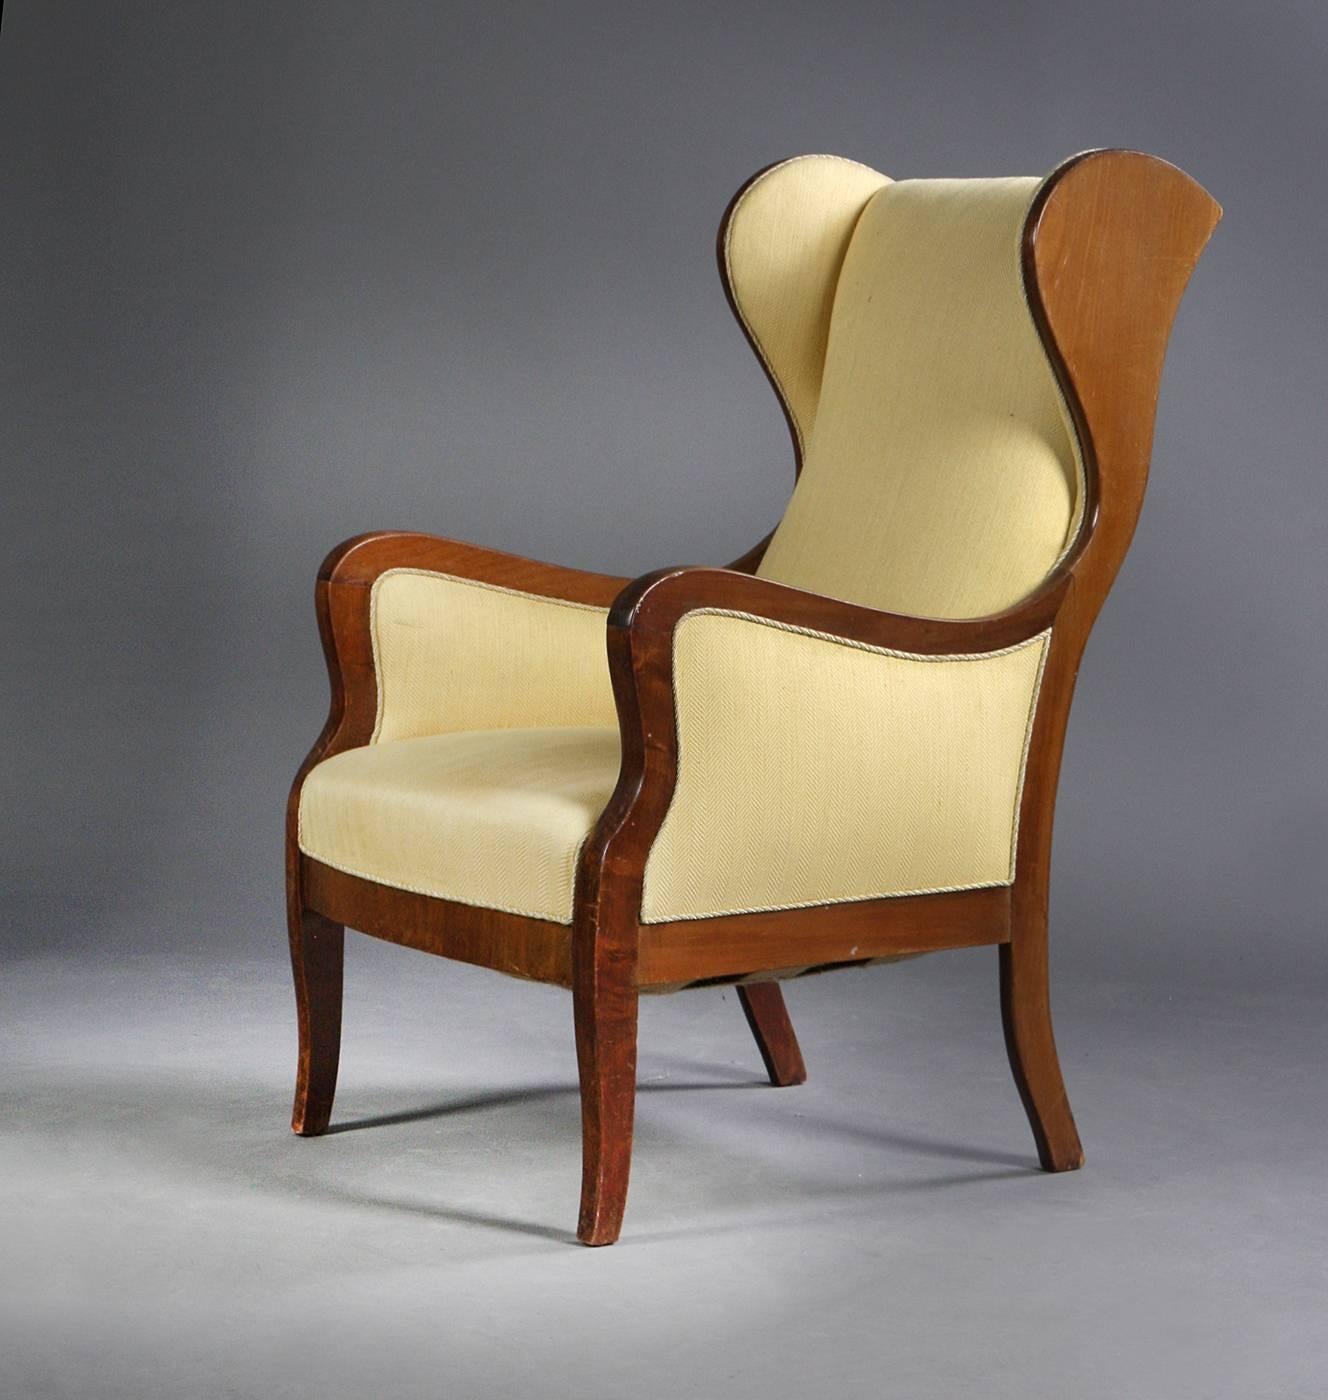 Beautiful classic 1930s-1940s solid mahogany wingback chair produced by Master Cabinetmaker Frits Henningsen, Denmark. Very elegant design that fits superbly into any modern design making a strong yet refined statement. Some wear to the varnish and